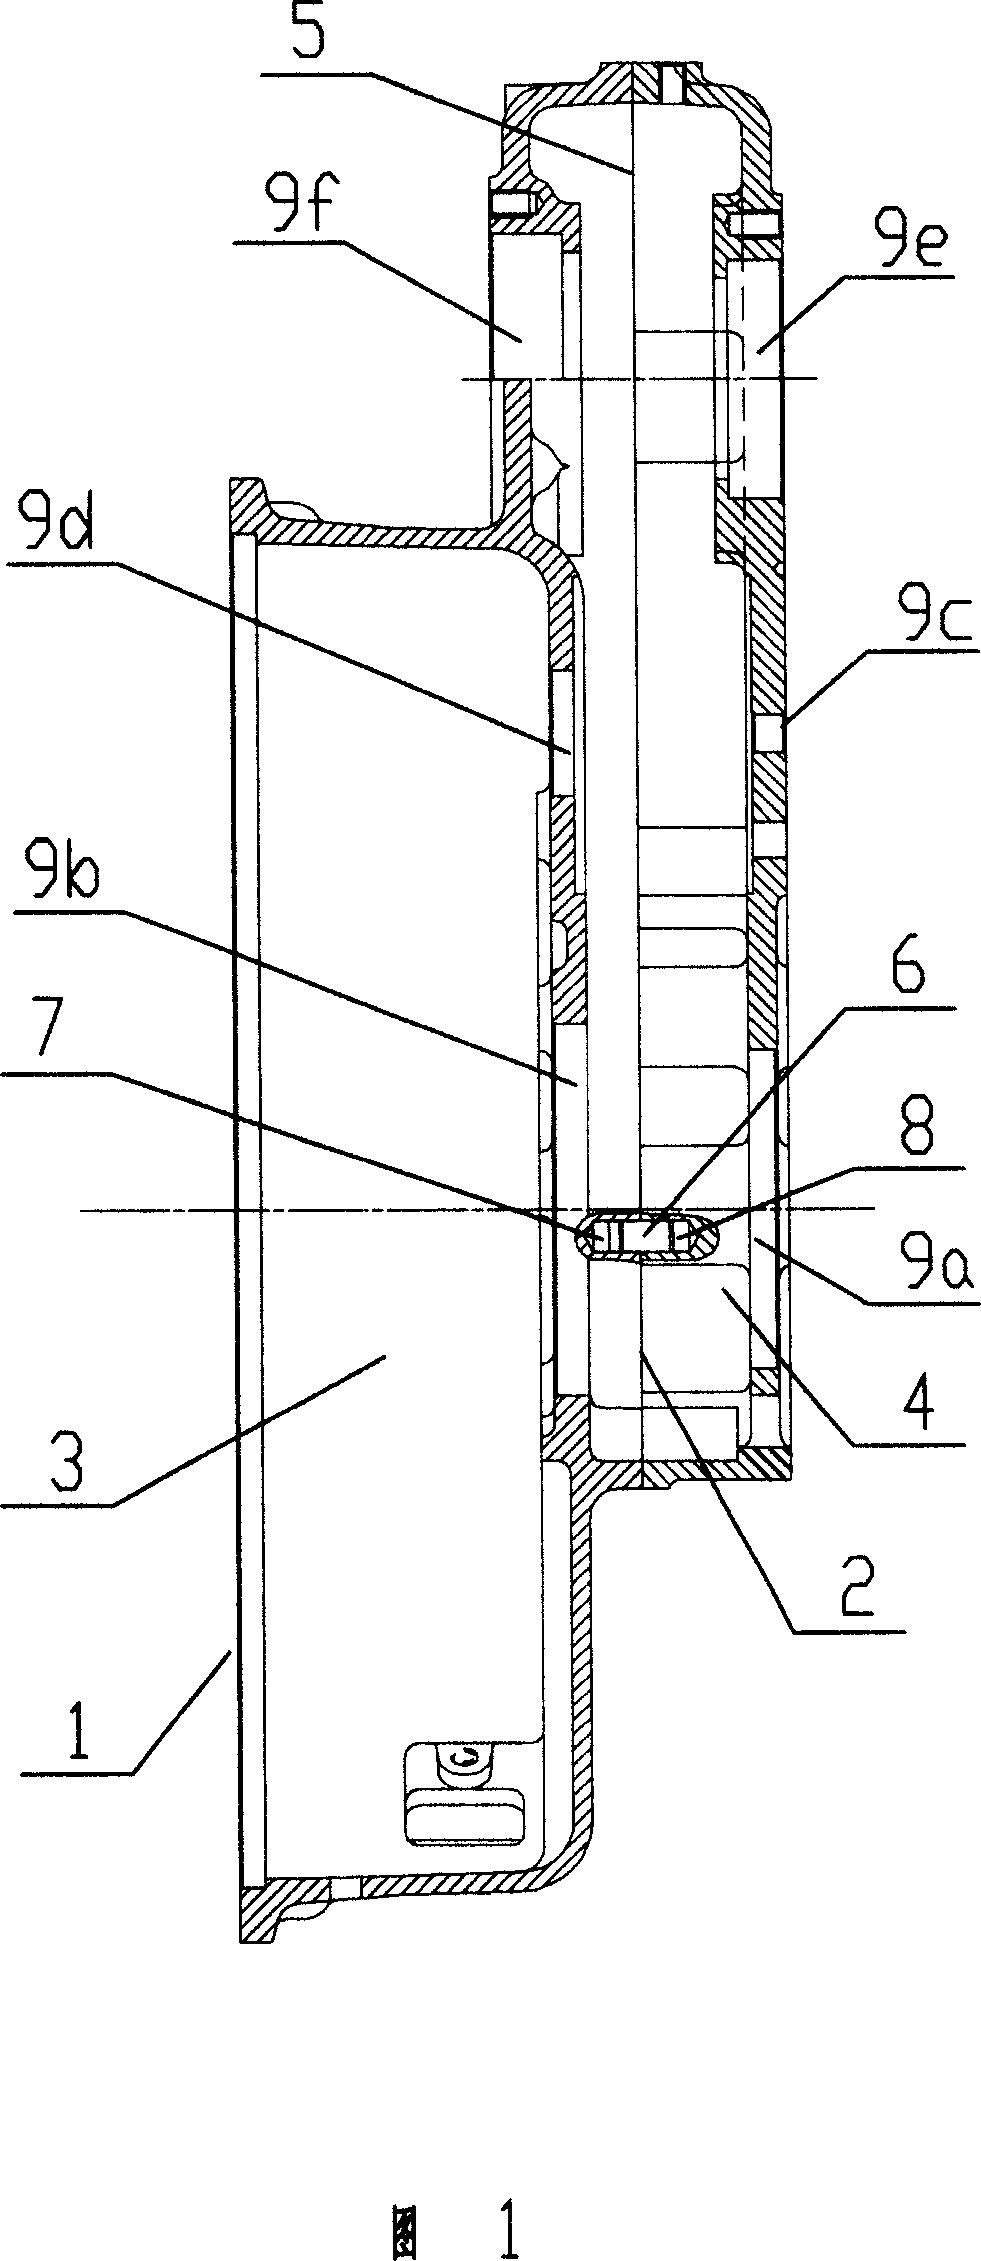 Method for processing output end tank of double-power output engine